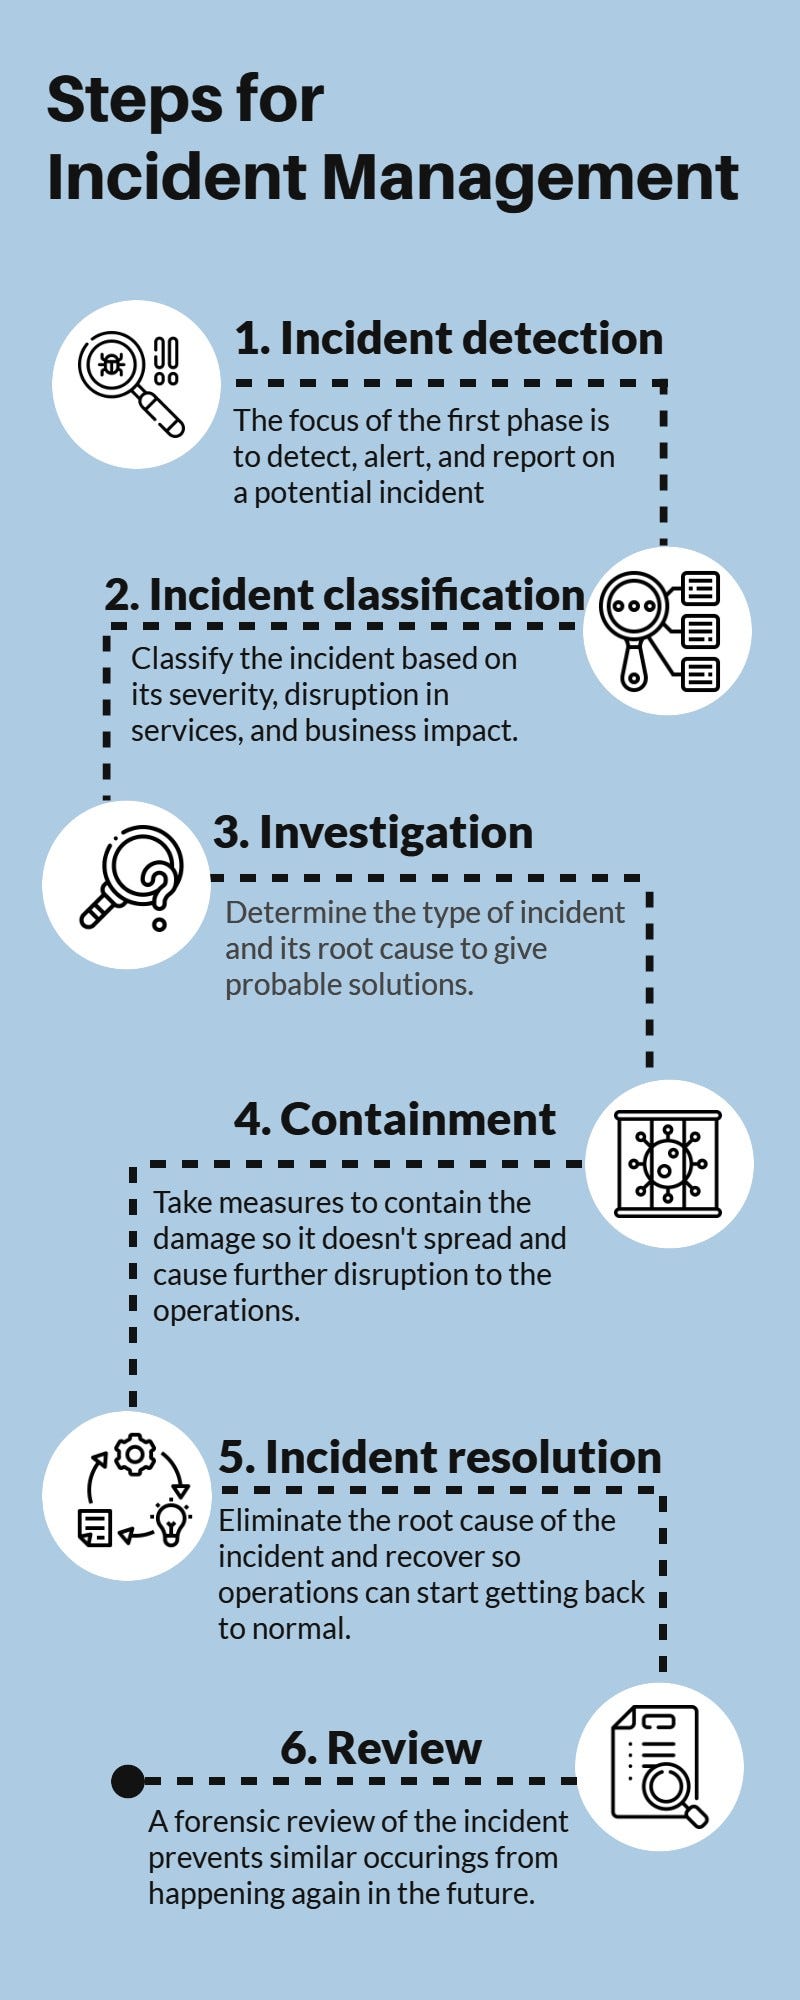 Crucial steps for incident resolution